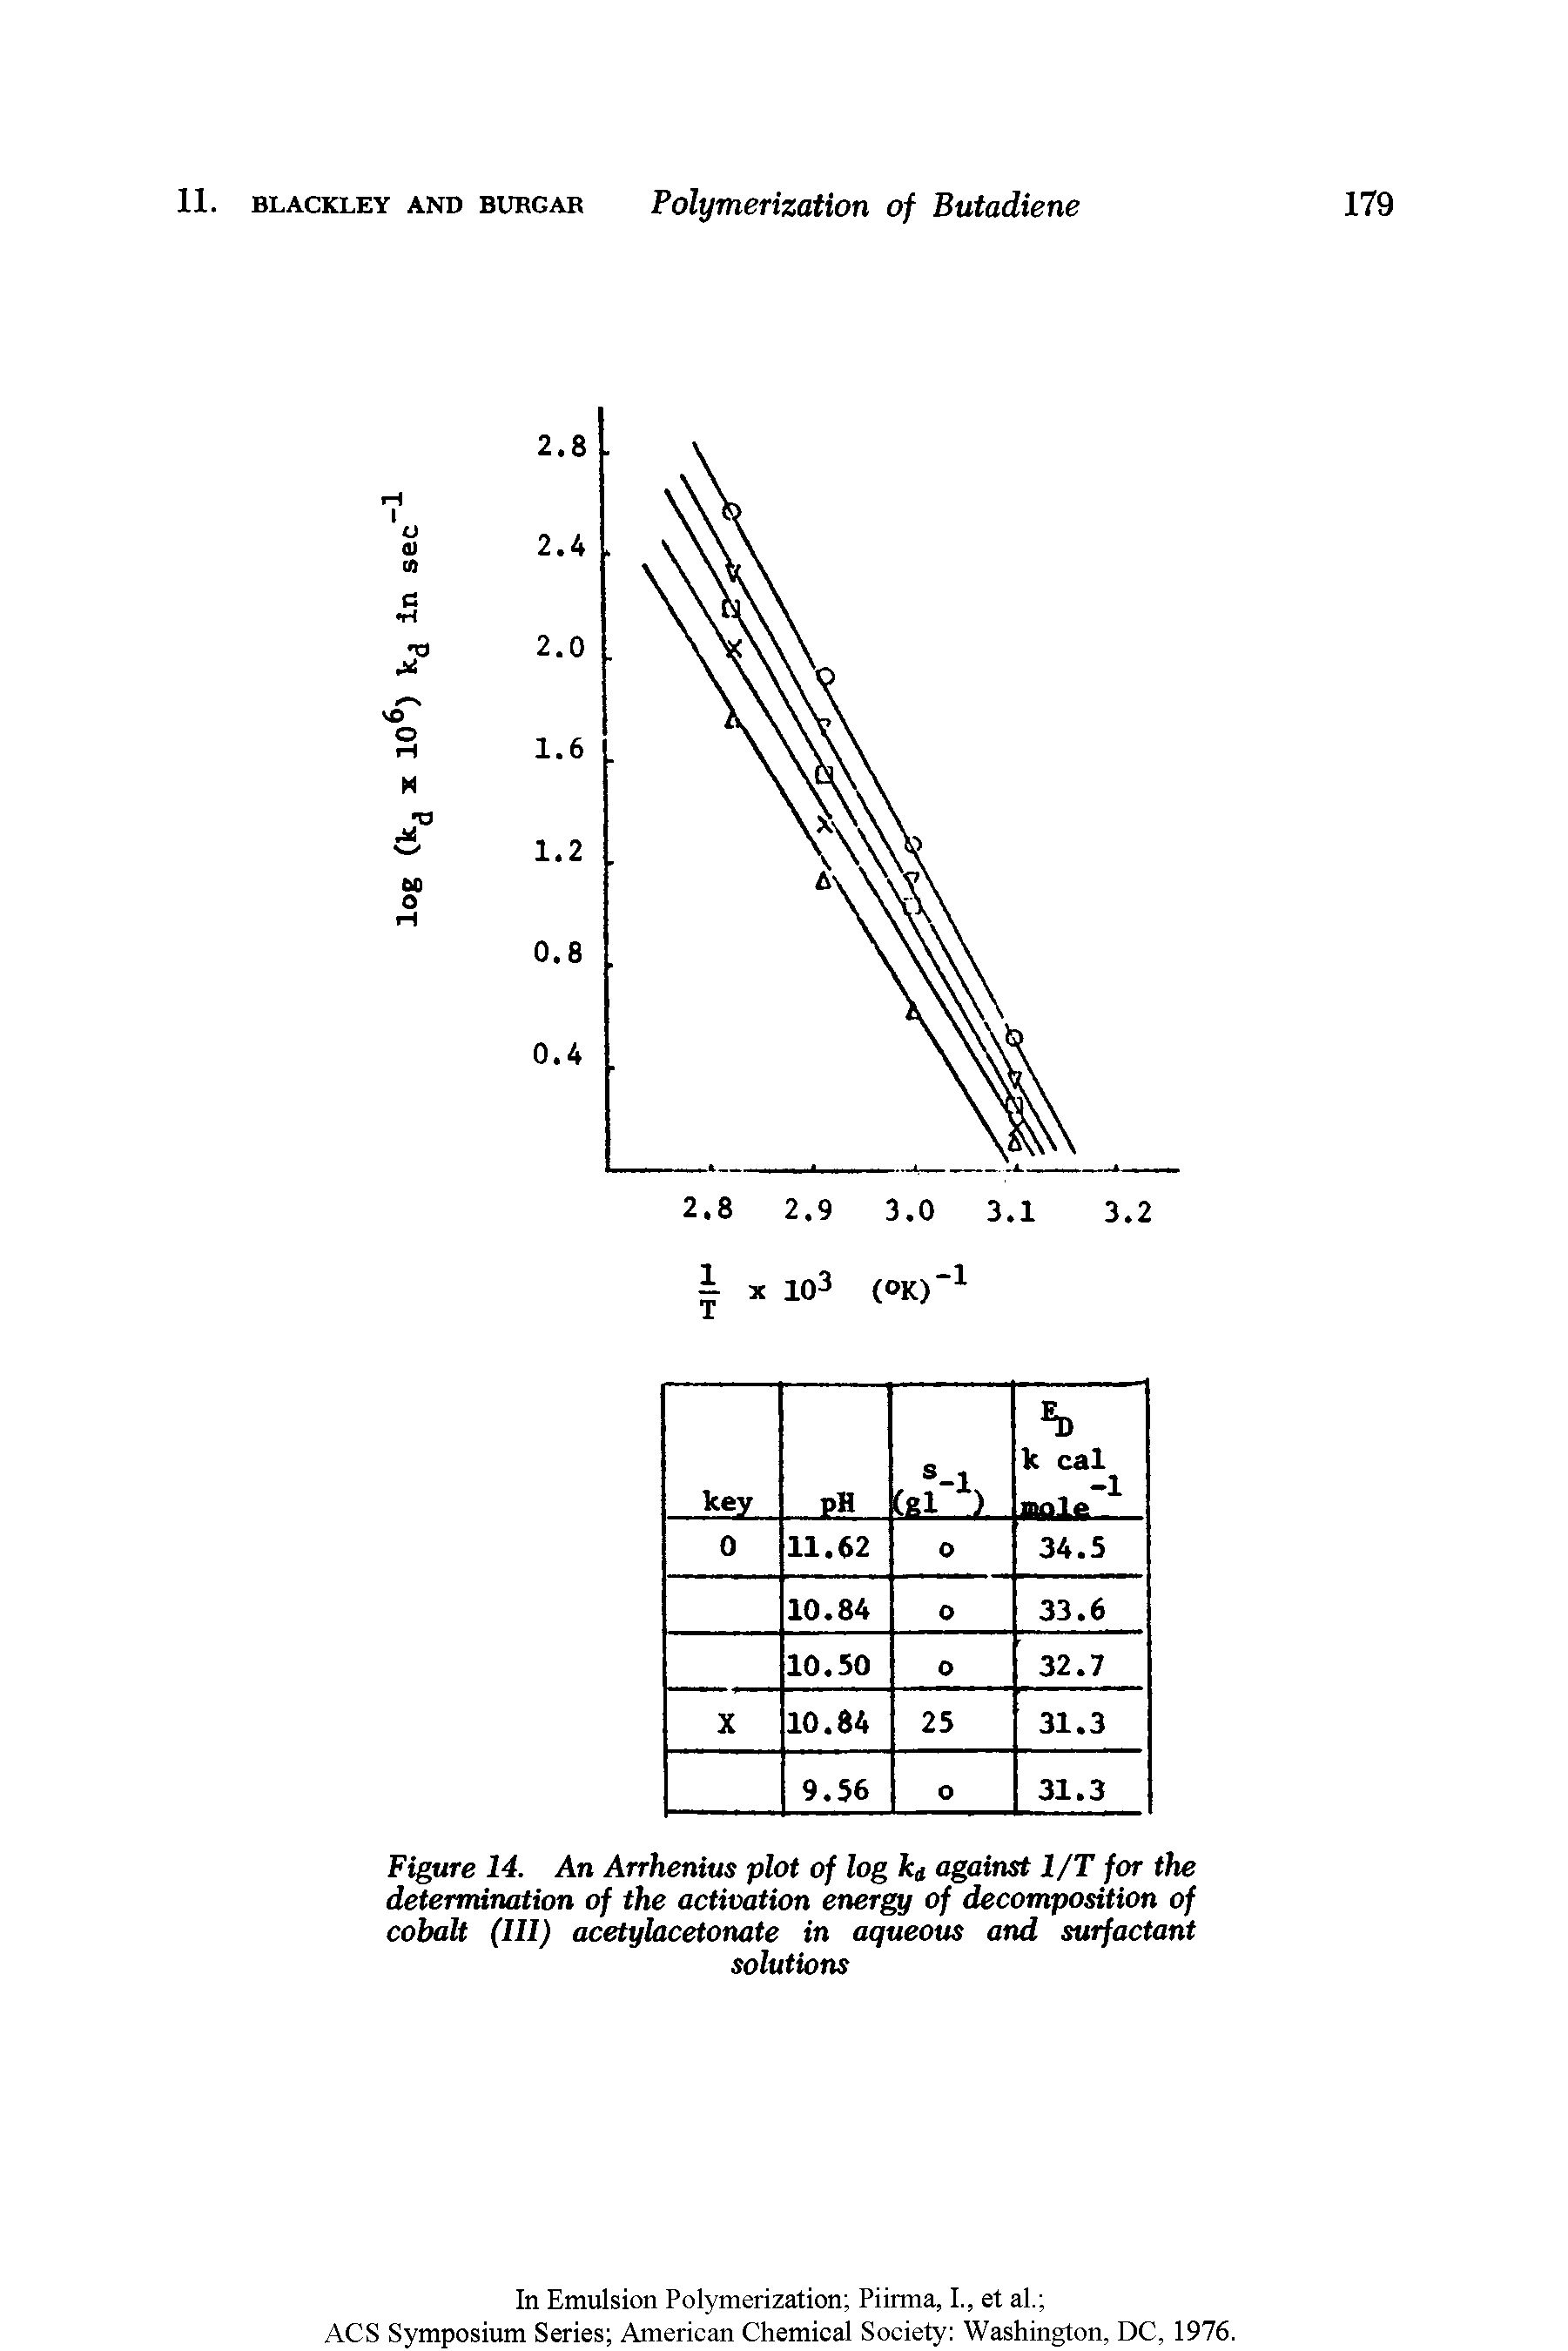 Figure 14. An Arrhenius plot of log ki against 1/T for the determination of the activation energy of decomposition of cobalt (III) acetylacetonate in aqueous and surfactant solutions...